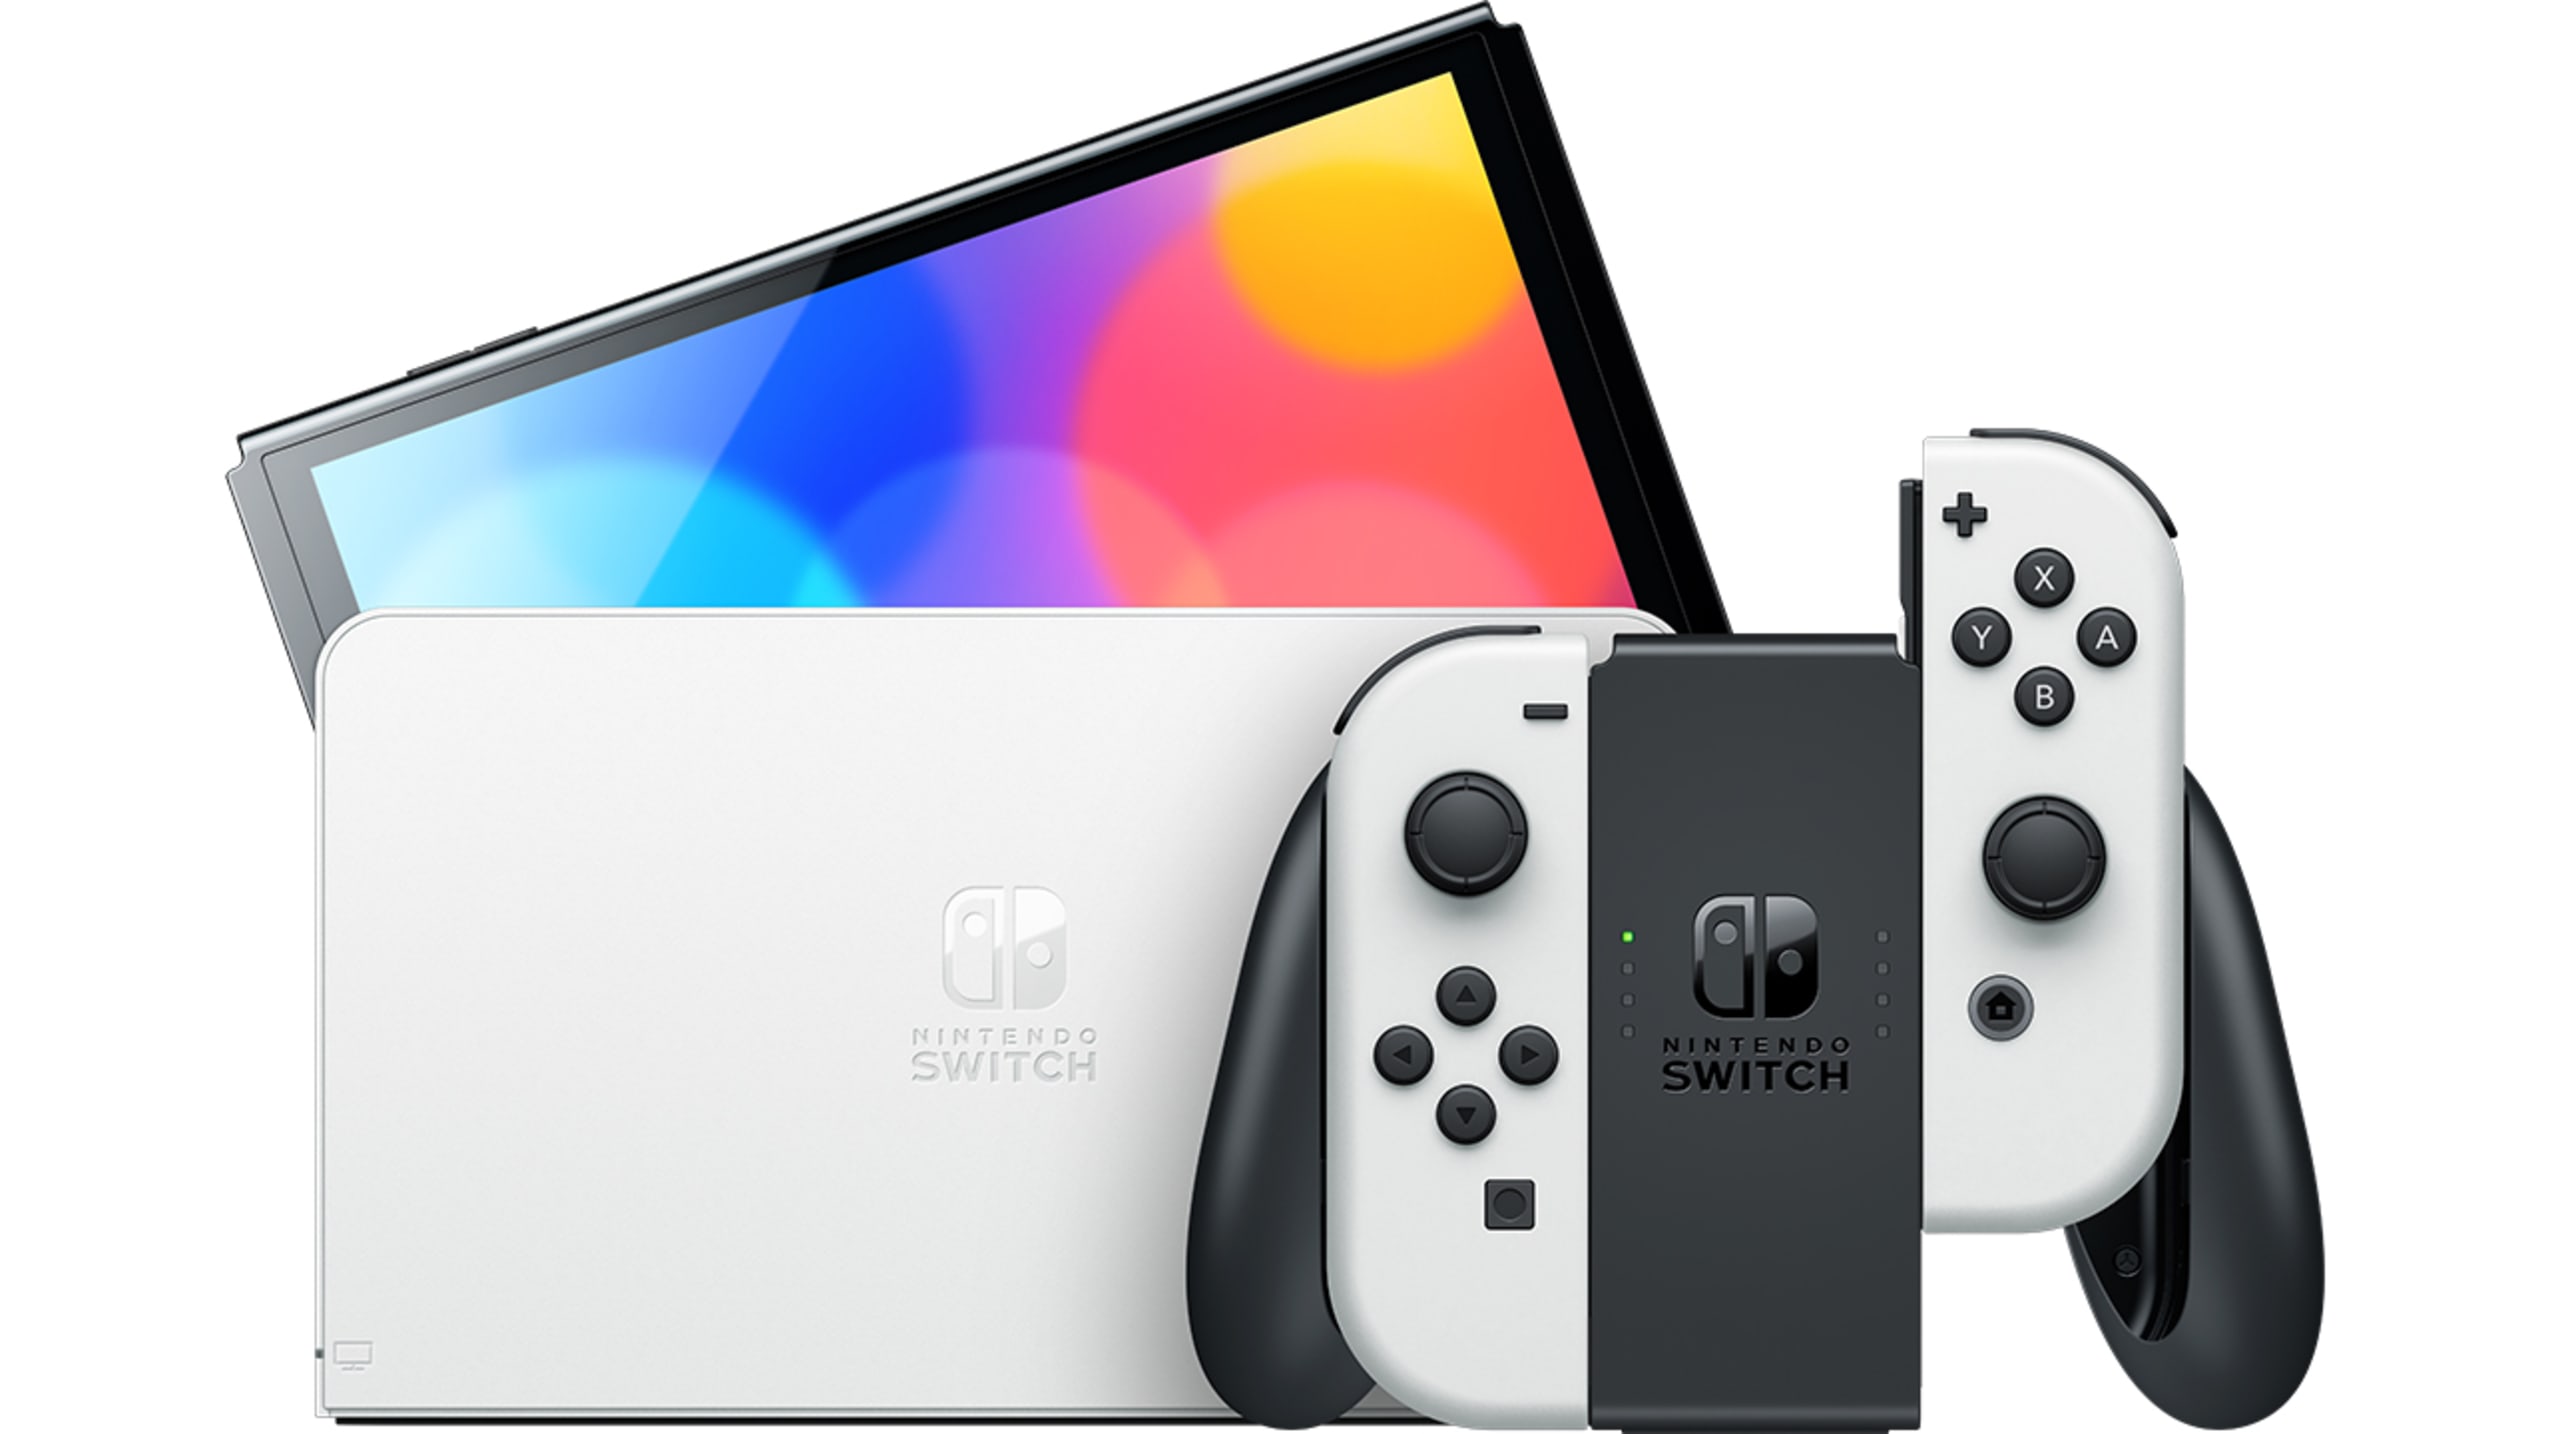 A white Nintendo Switch OLED console with its Joy-con controllers and dock.